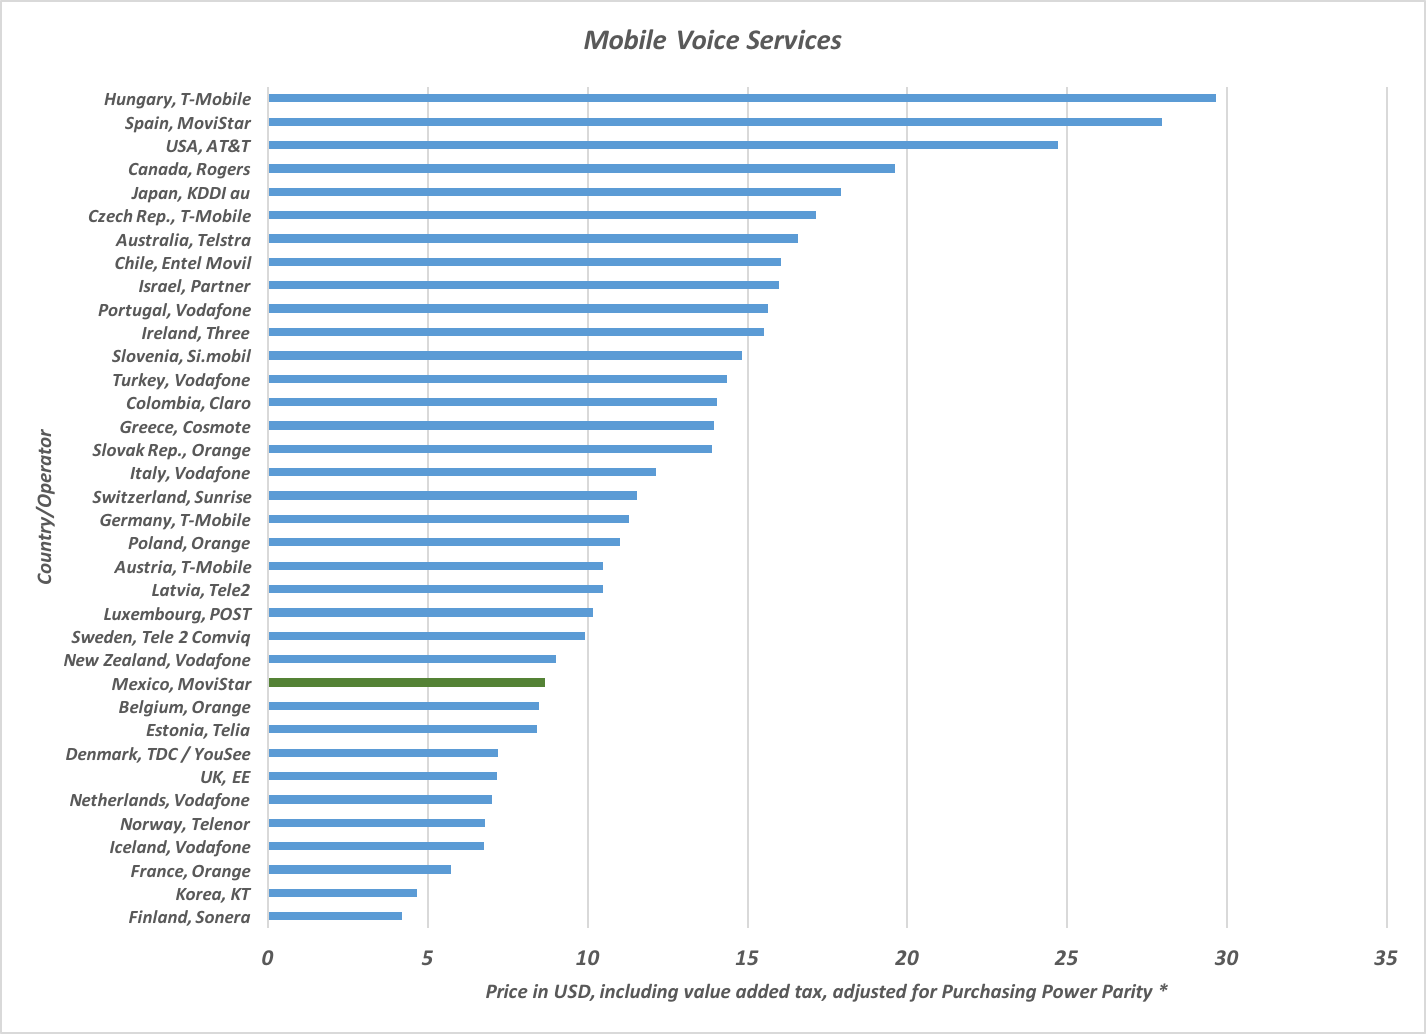 Figure 2b Mobile voice prices for selected operators from OECD countries. 2016.